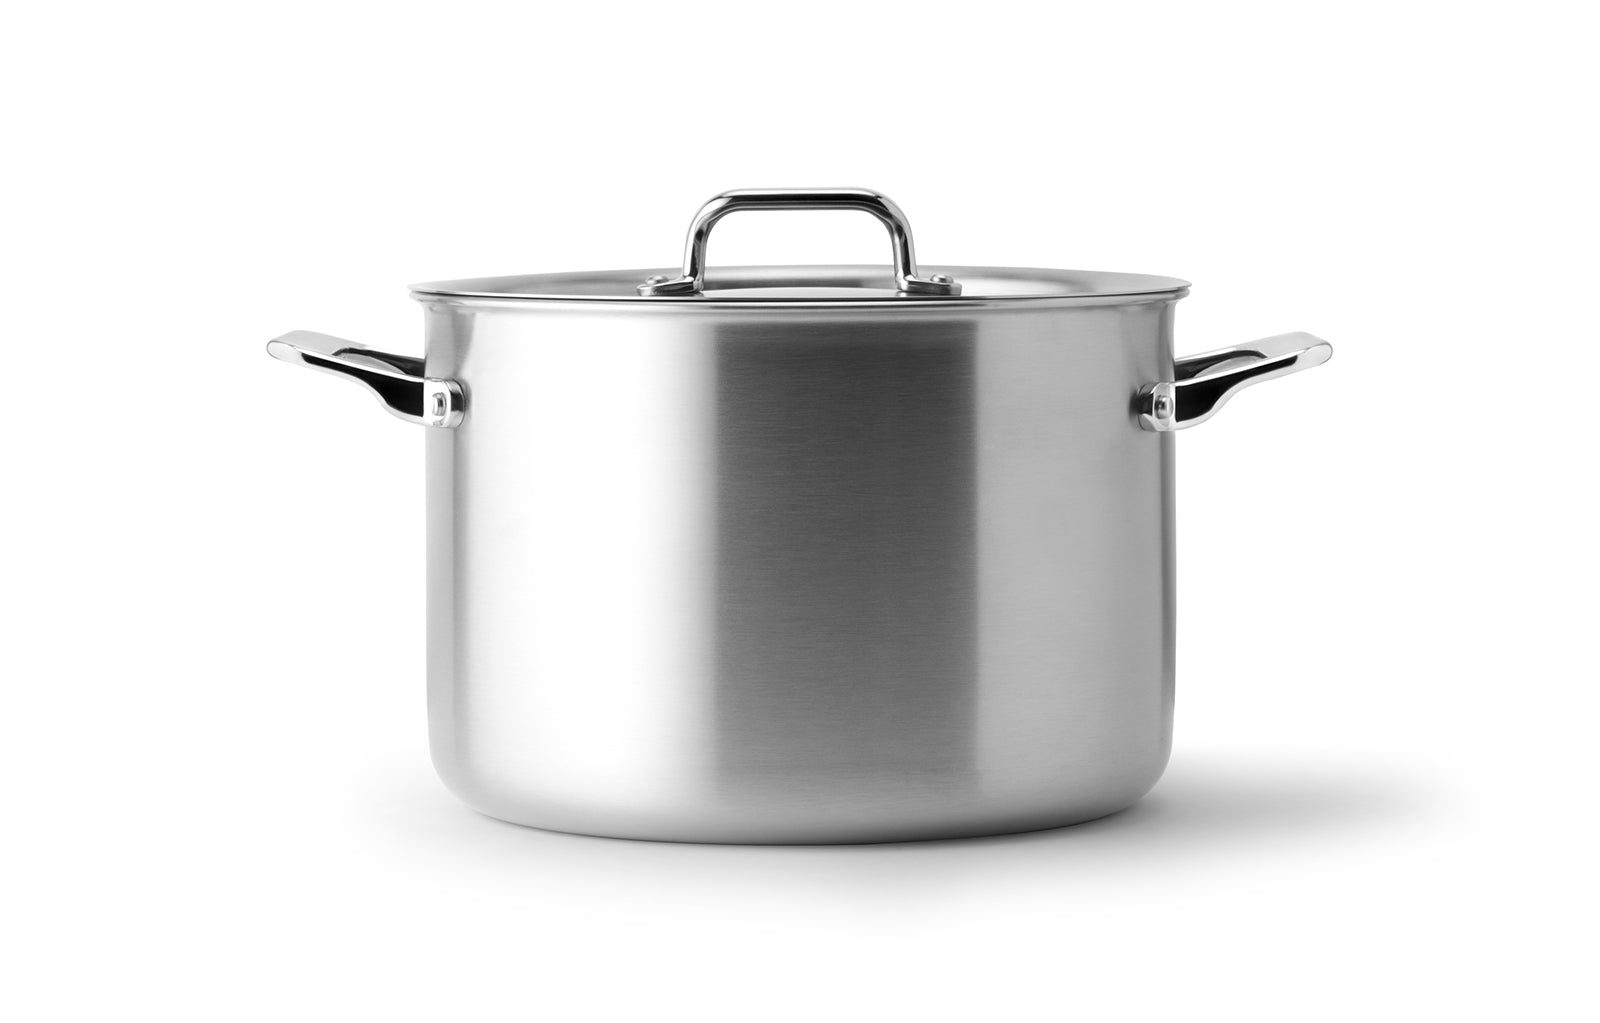 The Misen 8 QT Stockpot comes with a stainless steel lid.